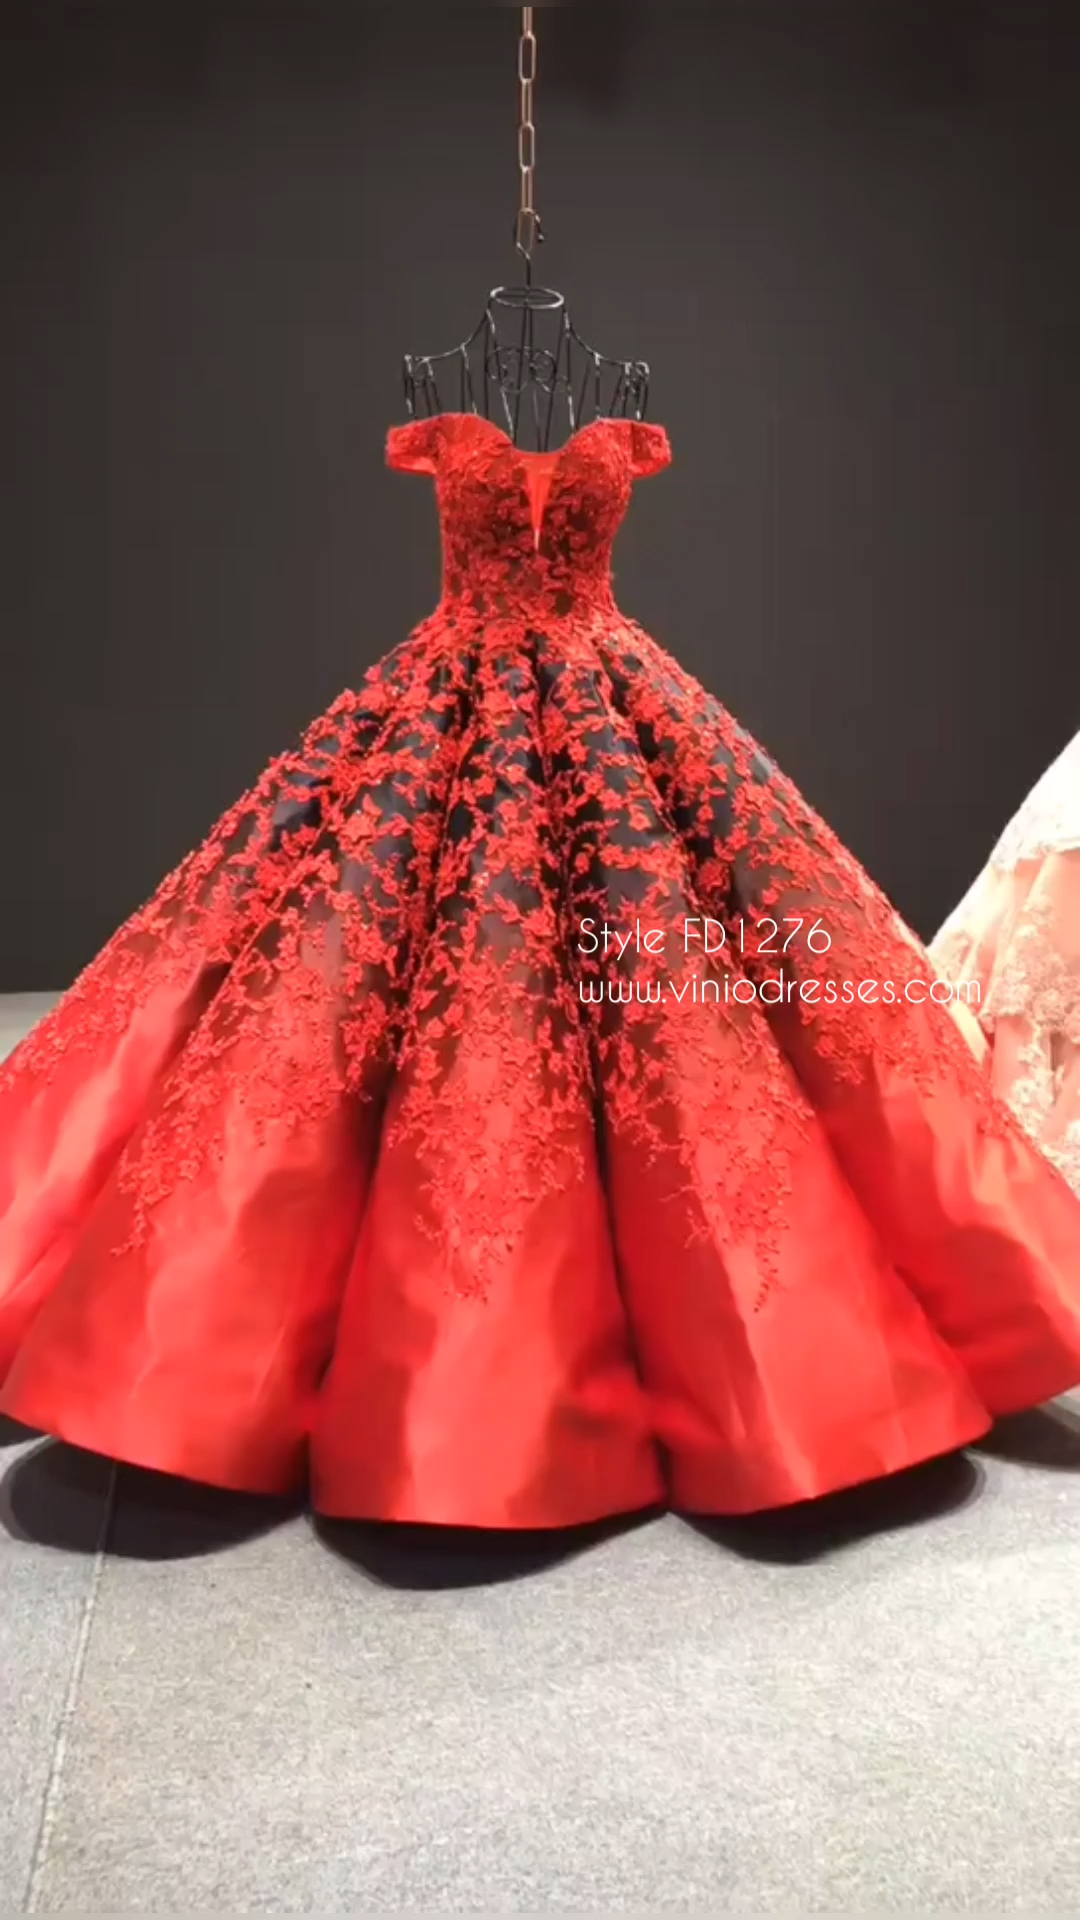 Red Lace Ball Gown Prom Dresses Off the Shoulder Quinceanera Dress FD1276 -   14 dress Red lace ideas